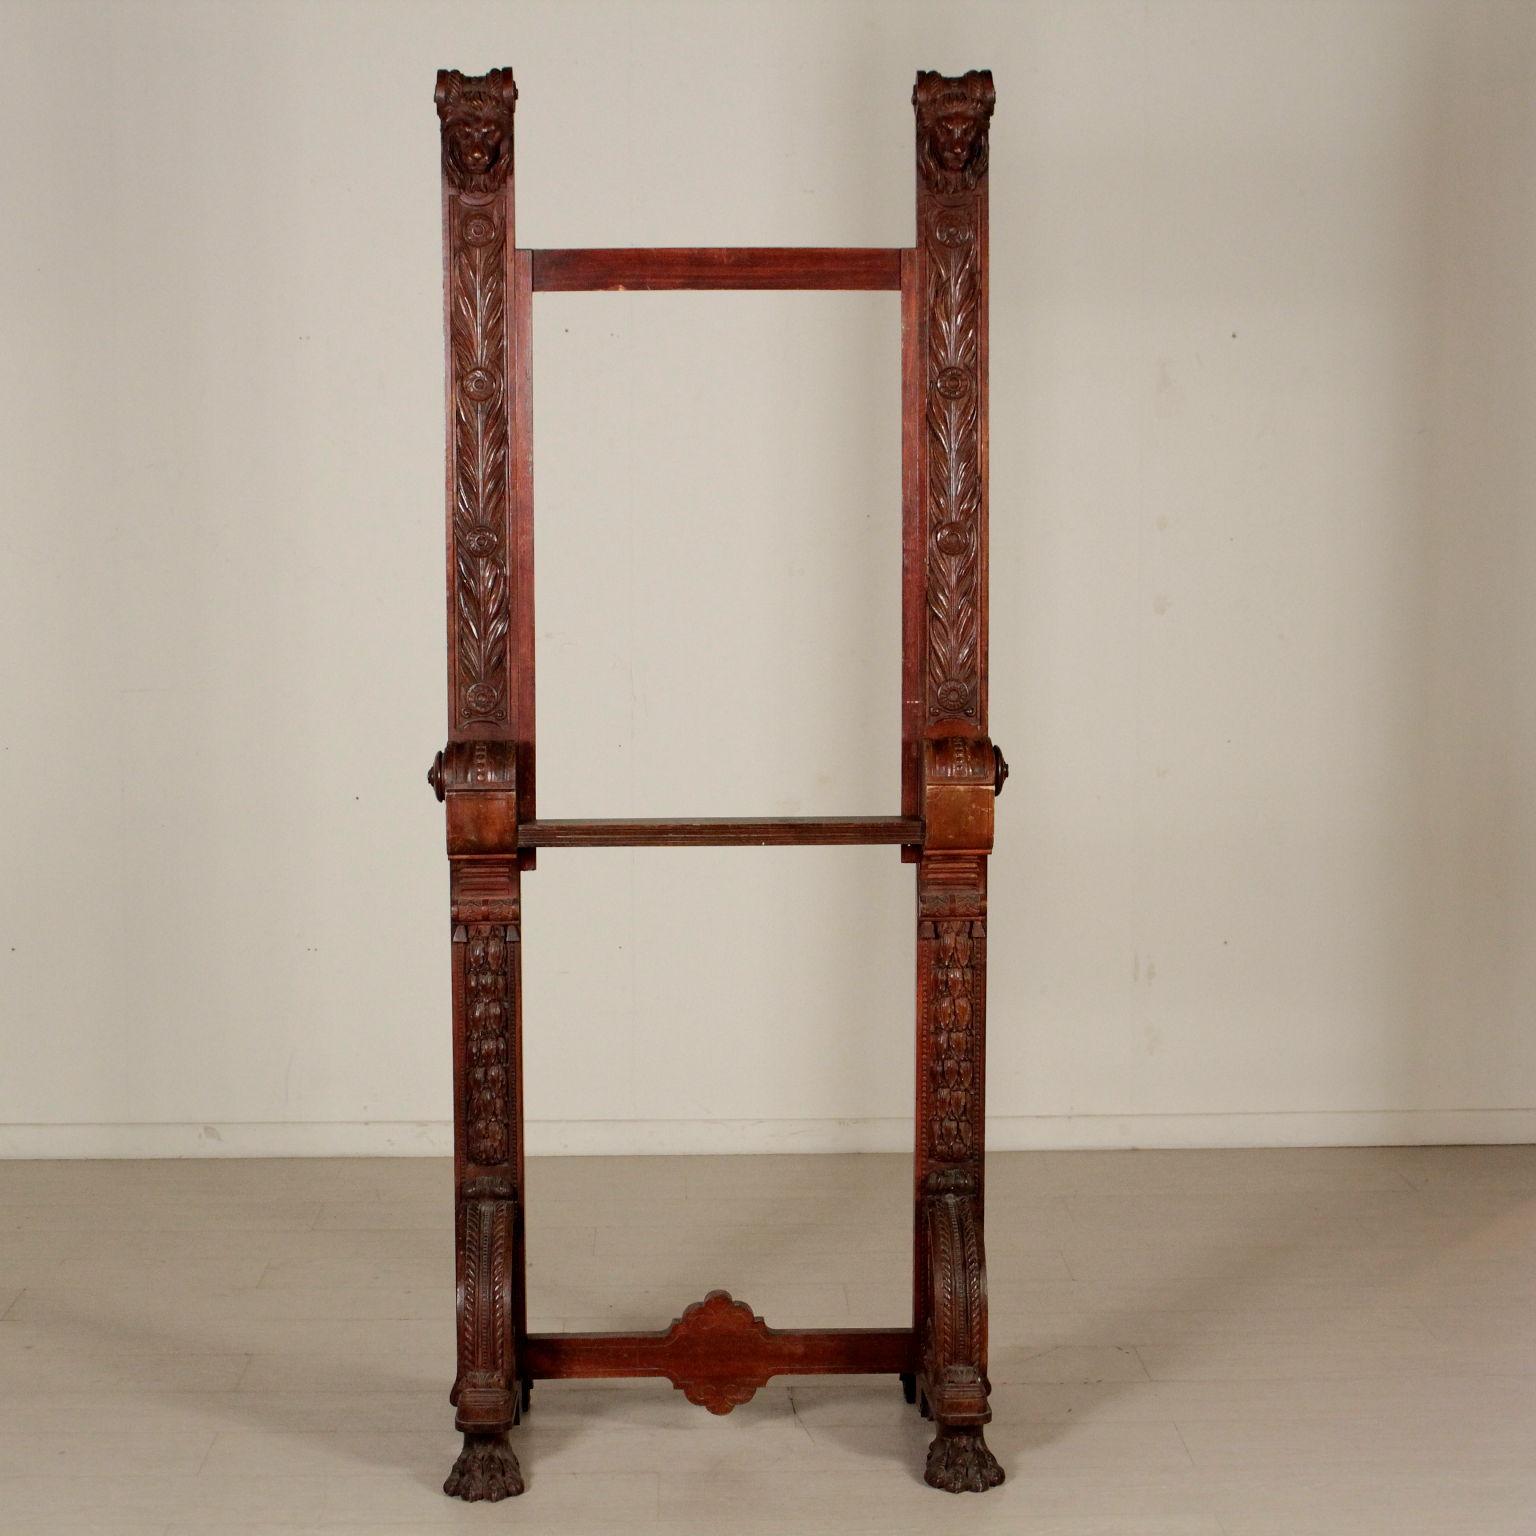 An impressive easel for paintings, finely carved. Ferine feet with volutes and crossbeams. Uprights with leaves culminating with leonine heads. Not adjustable ground plane. Manufactured in England, last quarter of the 19th century.